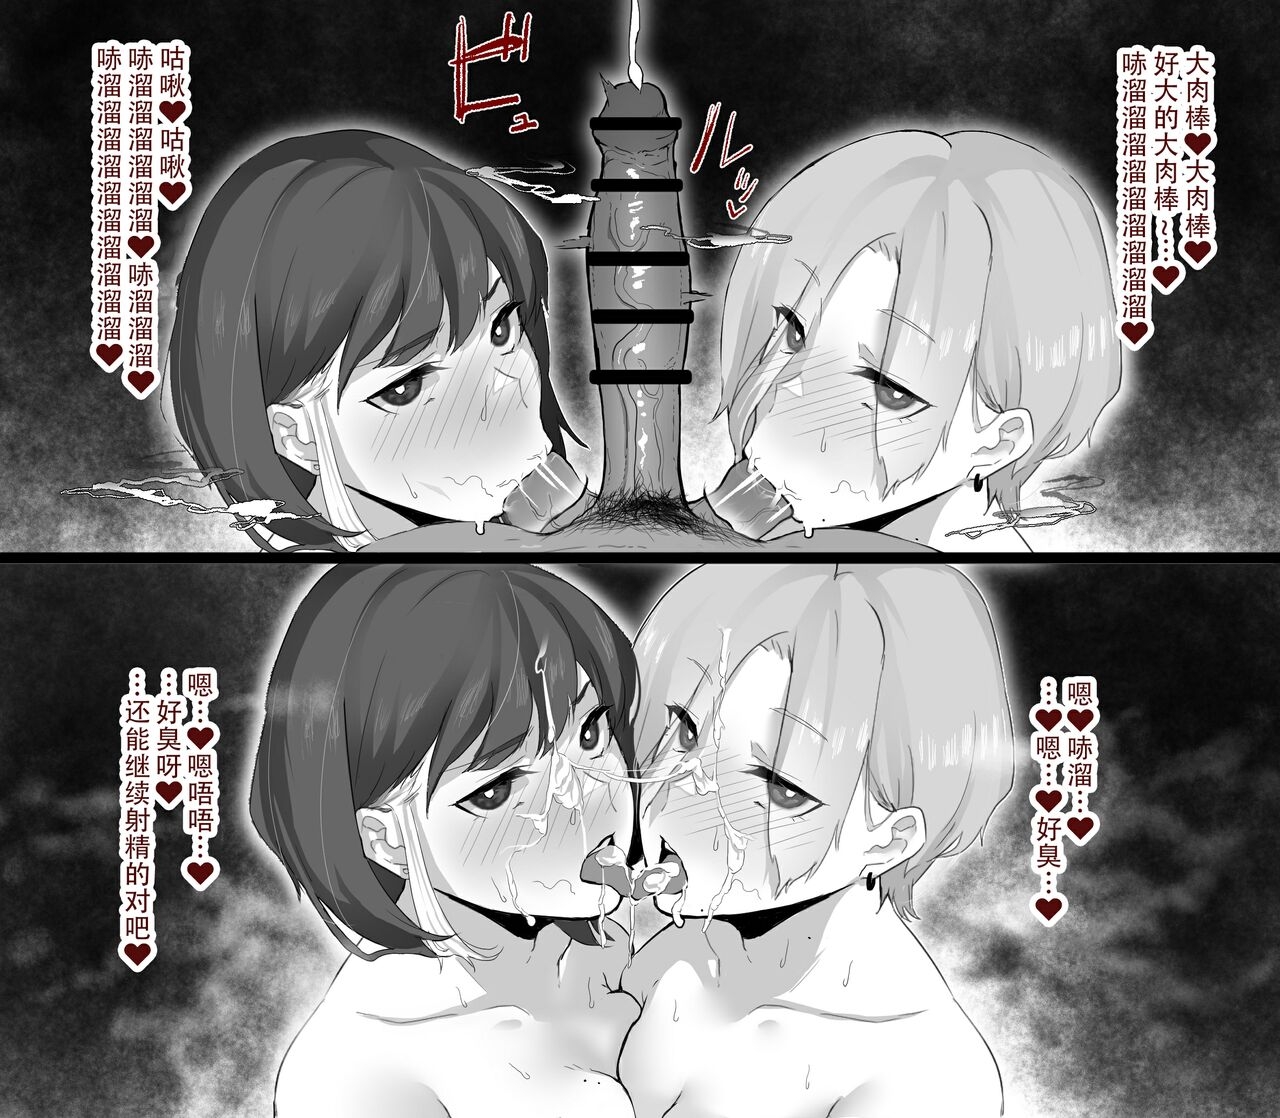 [Kagto (Alterna?)]As Lesbians Whose Sex Life is in a Slump and are in Need of New Stimulation, is it Okay for the Scent of Cock to Awaken our Female Instincts? [Chinese] [钢华团汉化组] 29